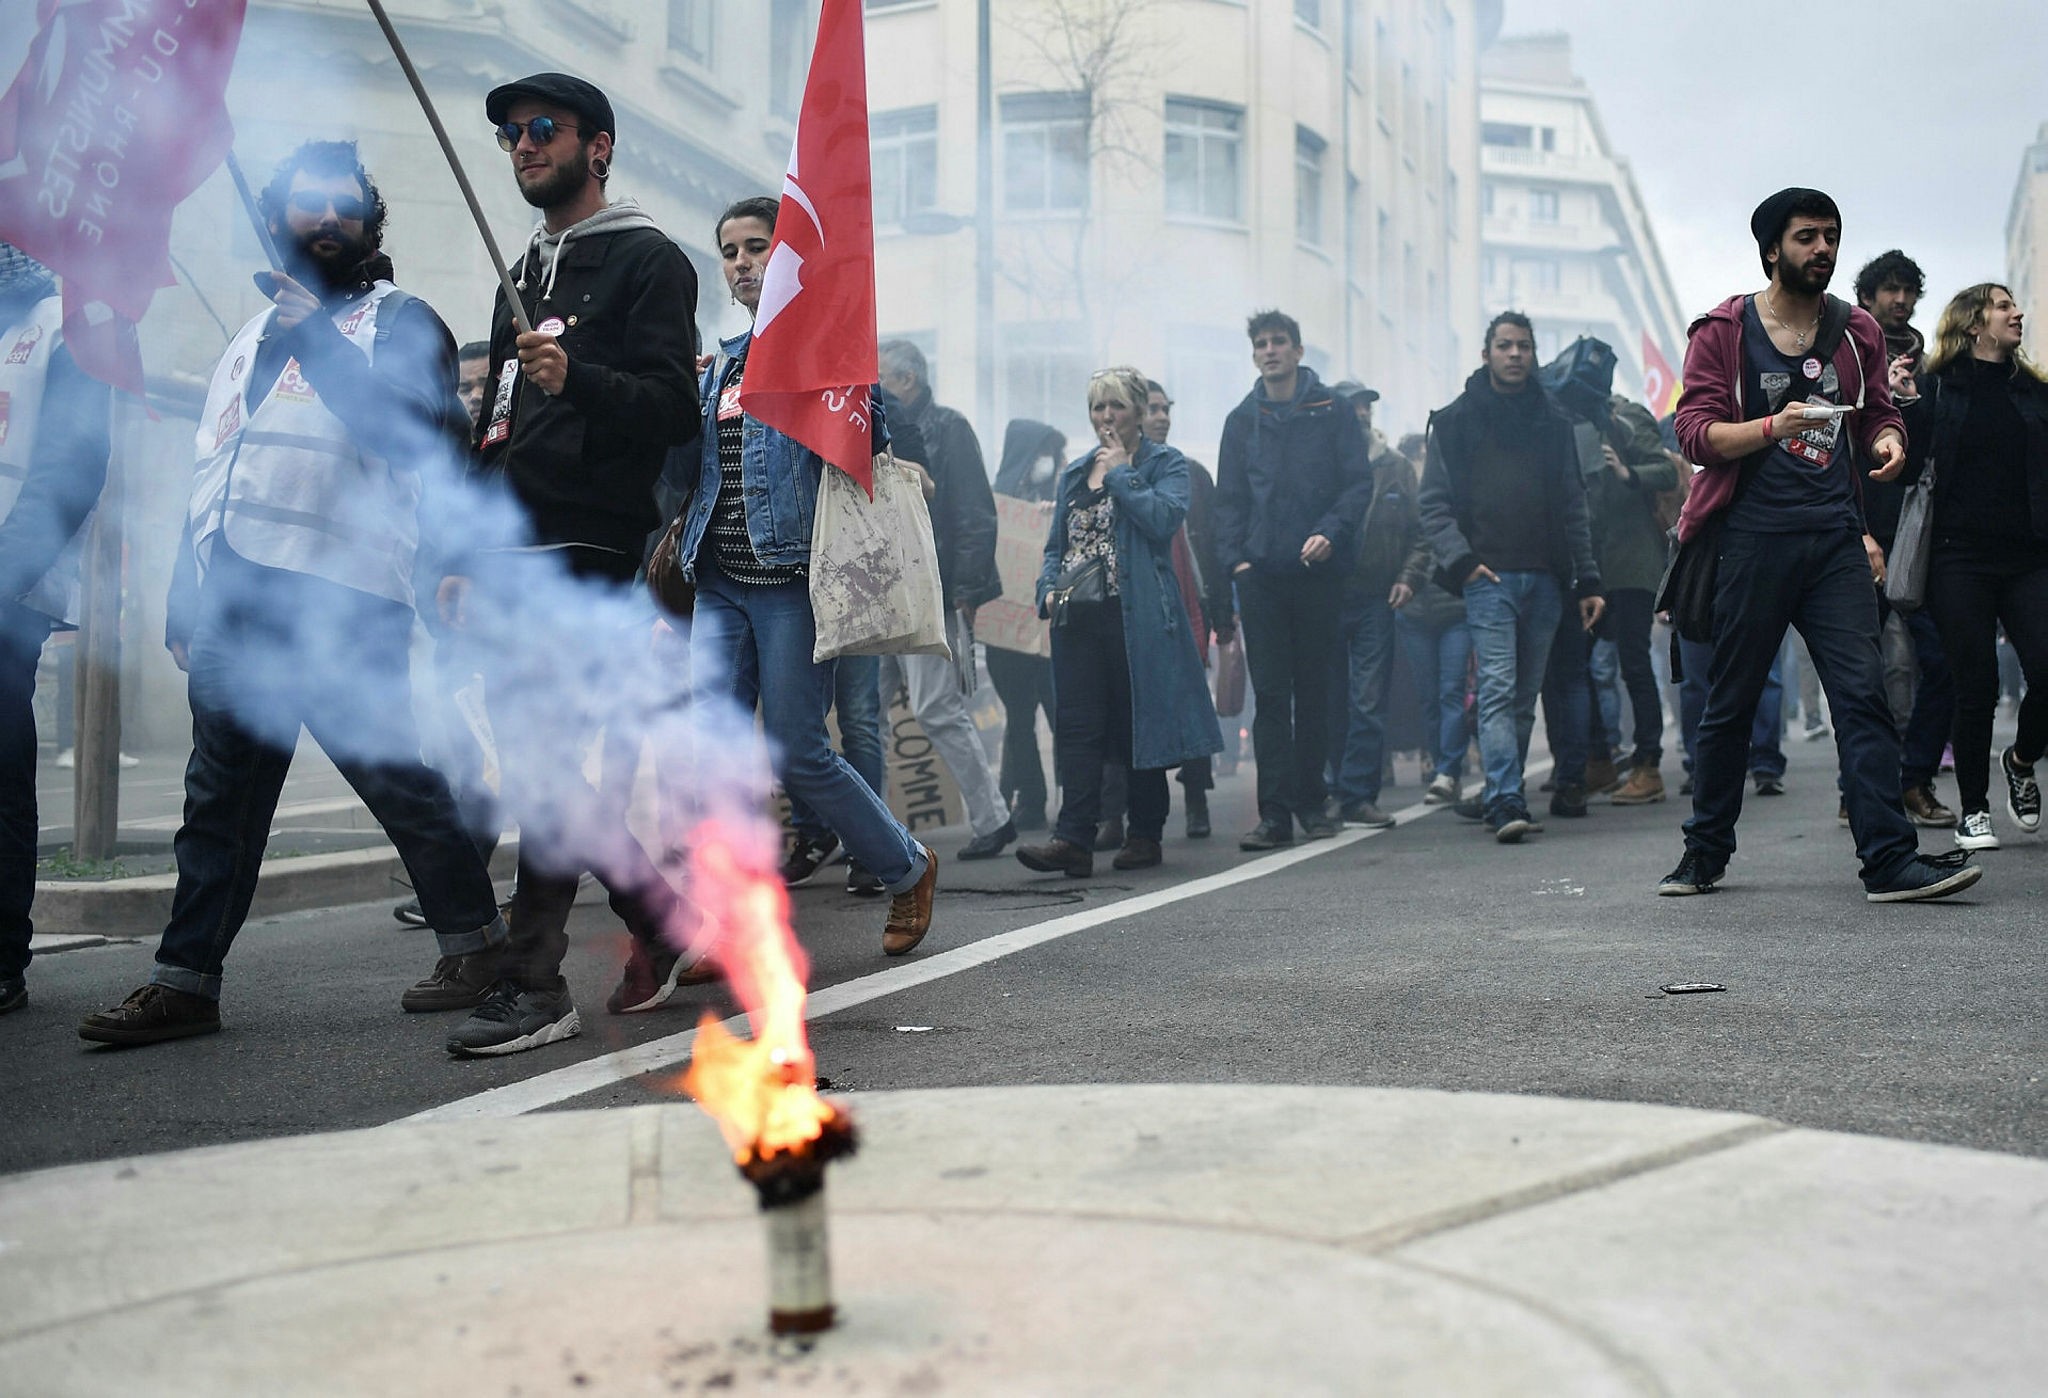 Students protest against the French presidentu2019s reform plans, Marseille, April 4.